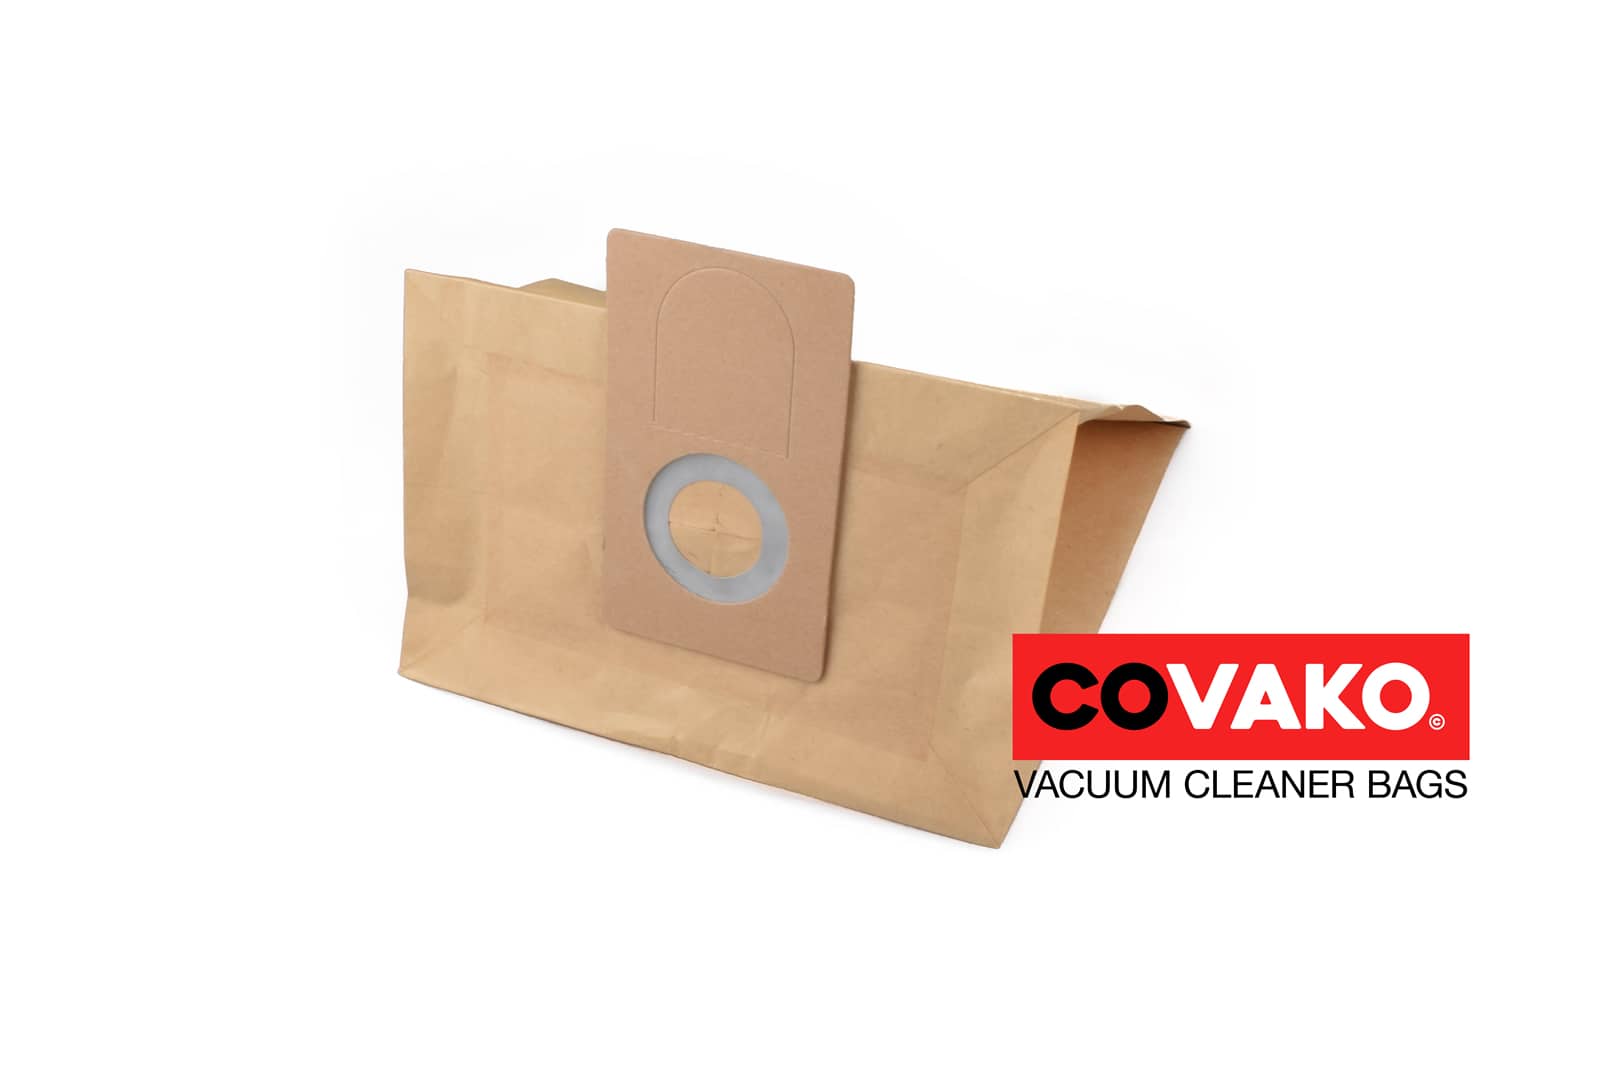 Fast S2 / Paper - Fast vacuum cleaner bags